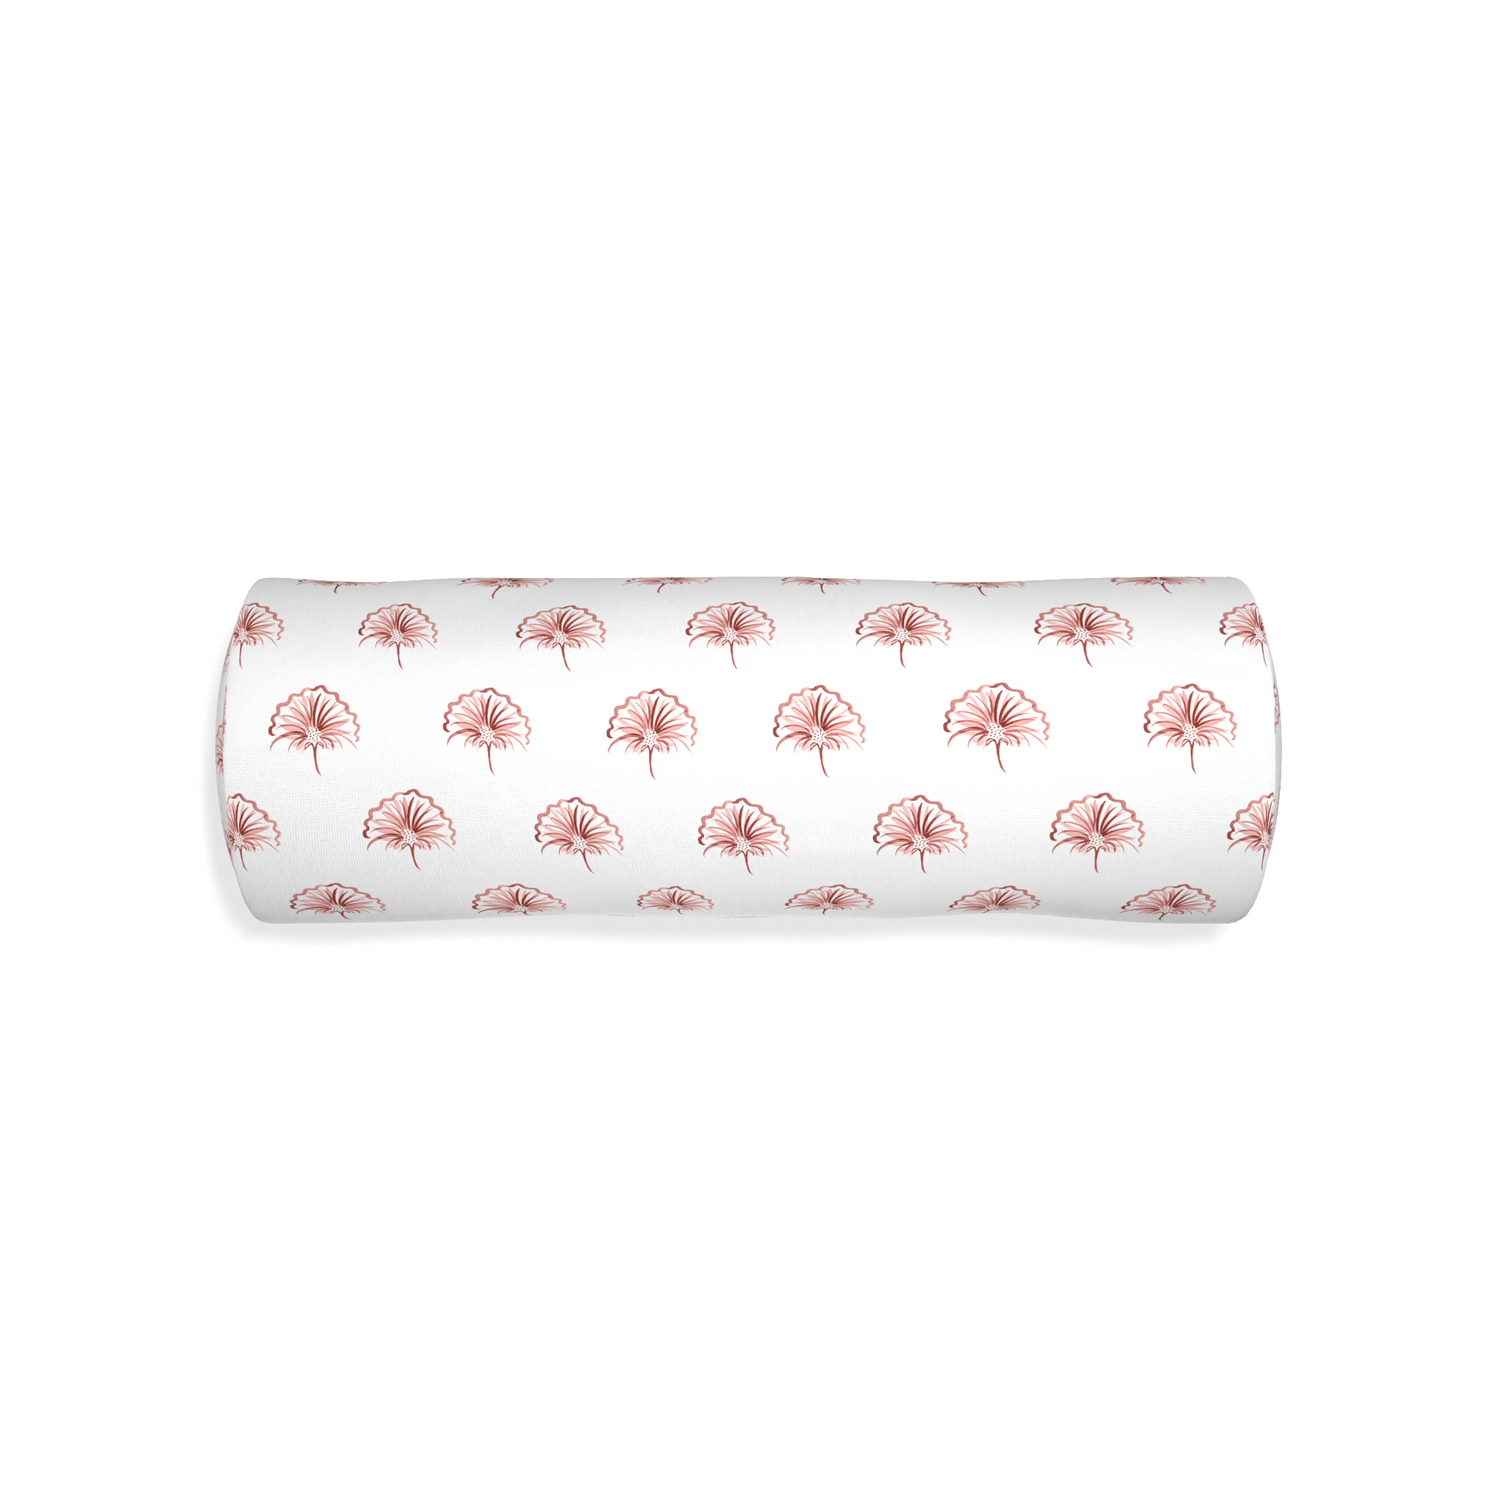 Bolster penelope rose custom floral pinkpillow with none on white background